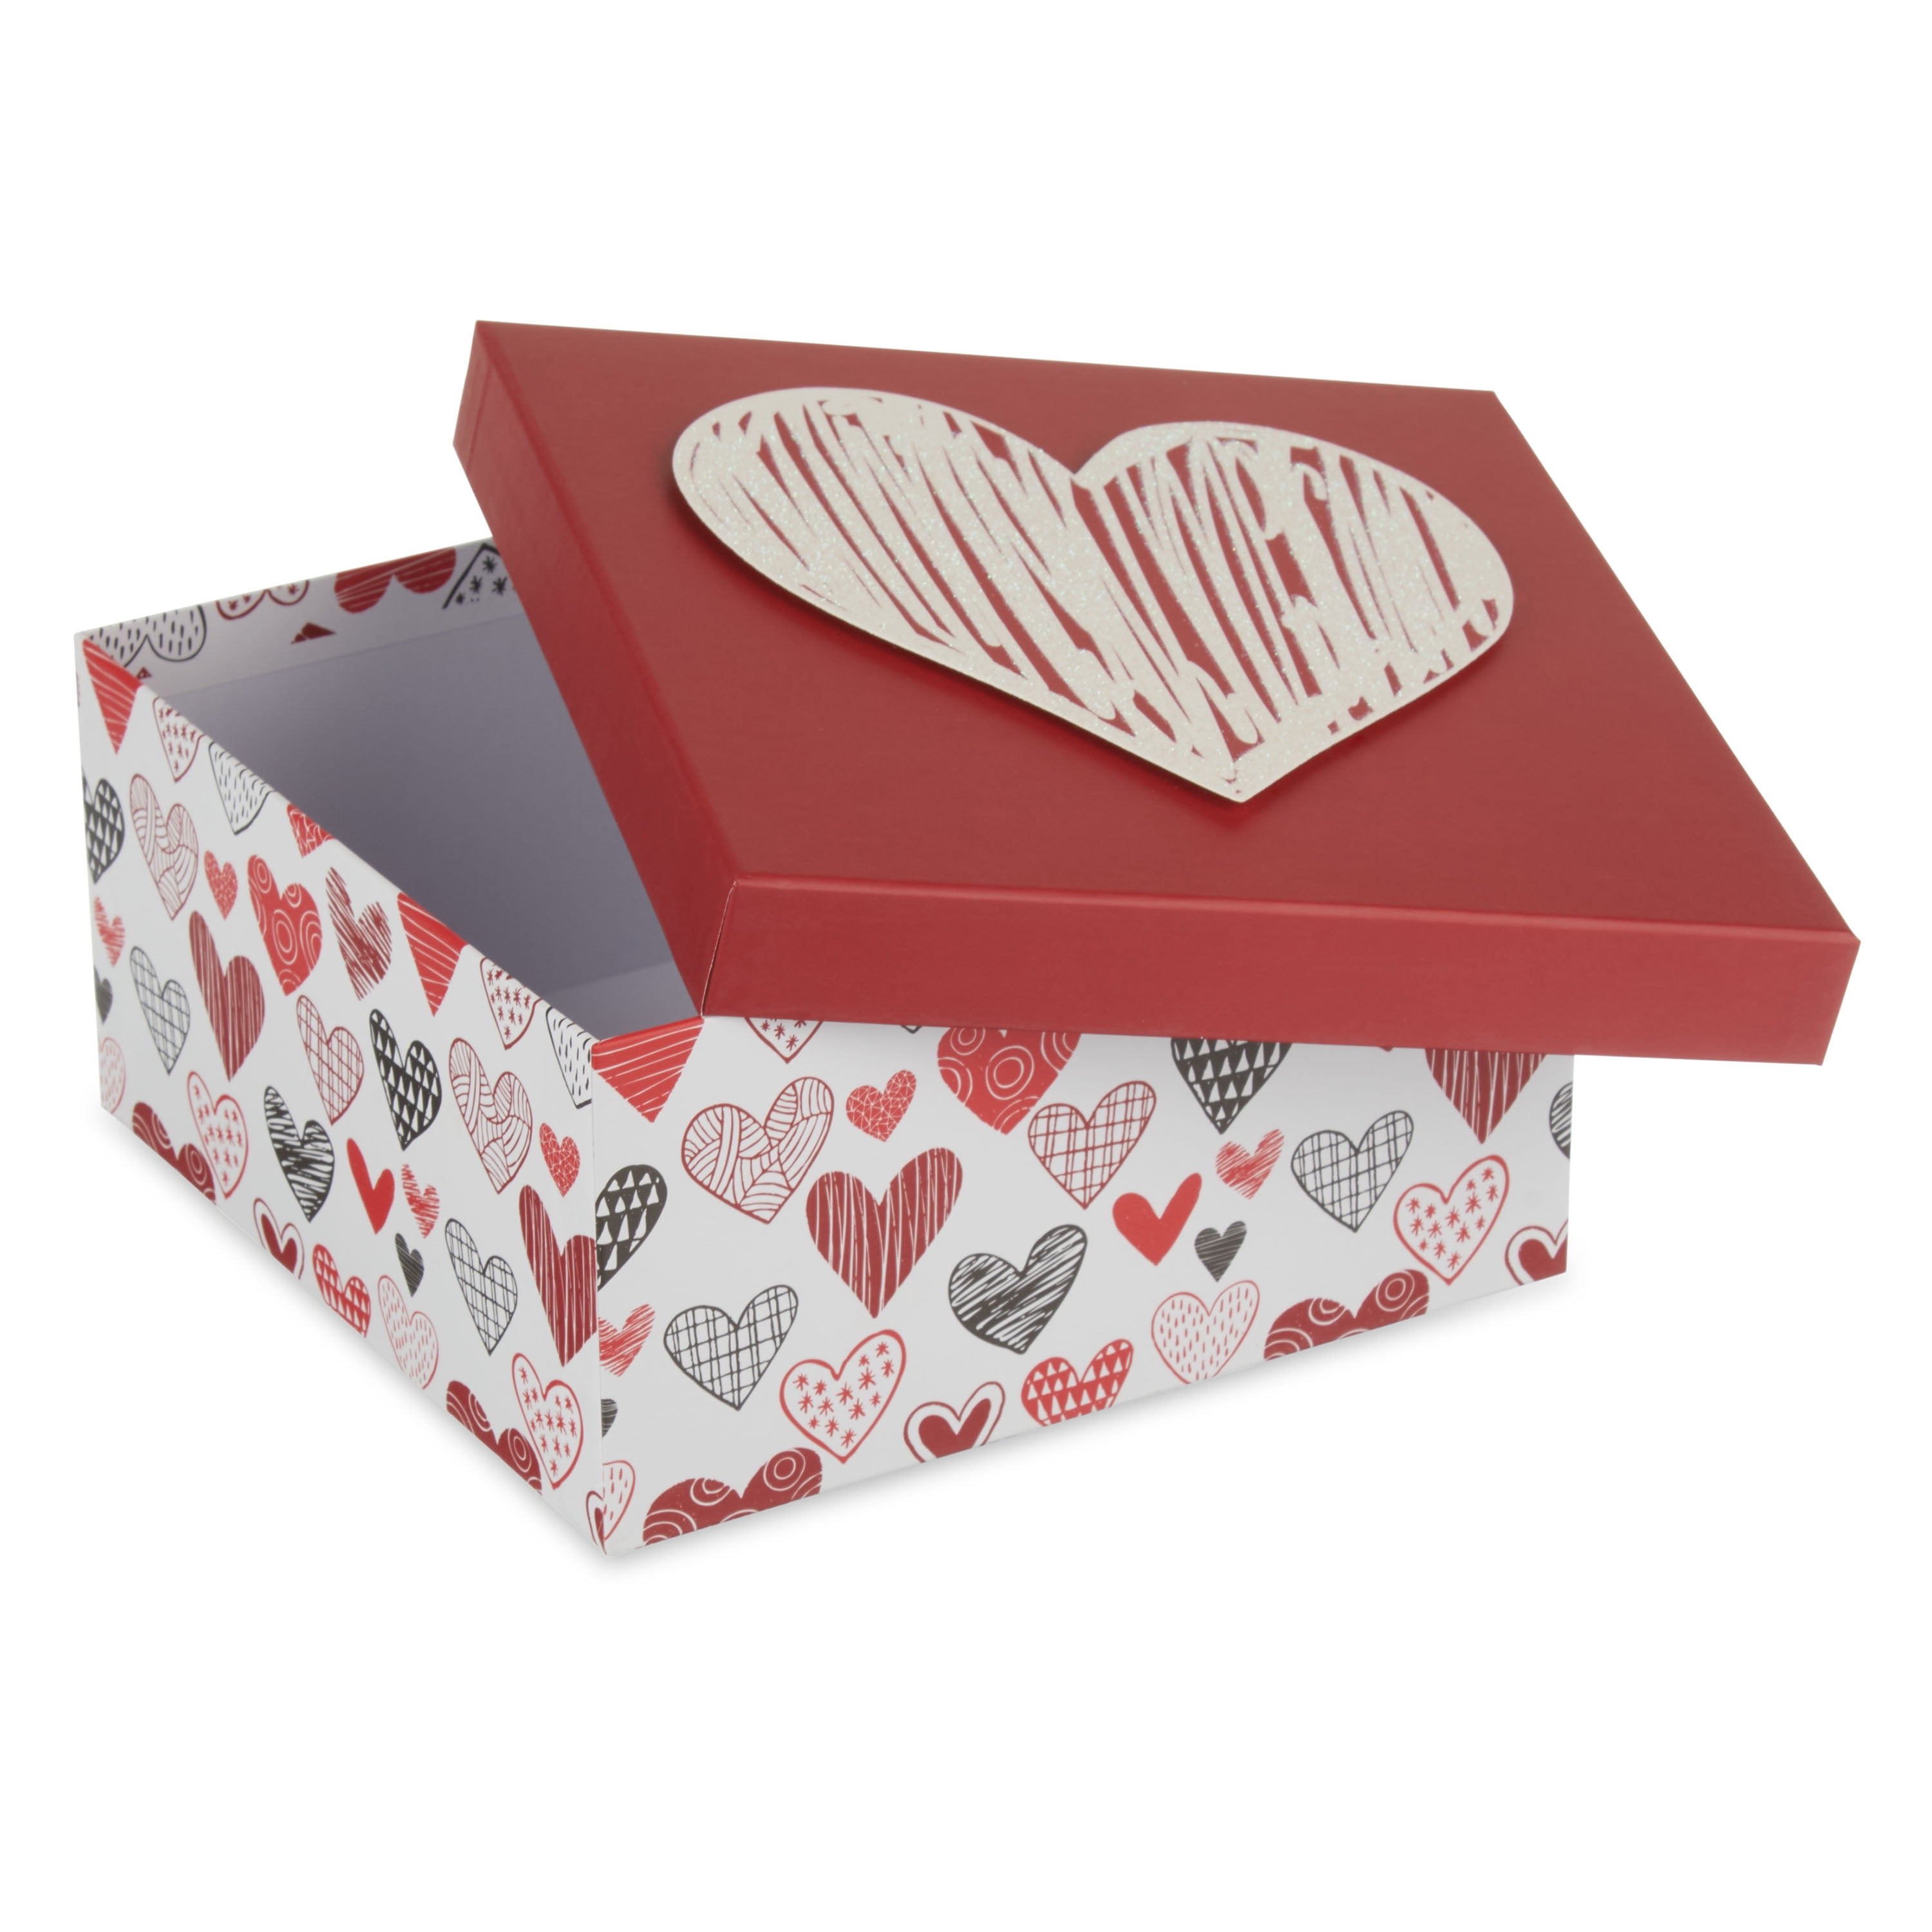 WAY TO CELEBRATE! Heart Valentine's Day Multi-Color Paper Gift Box, 8.25